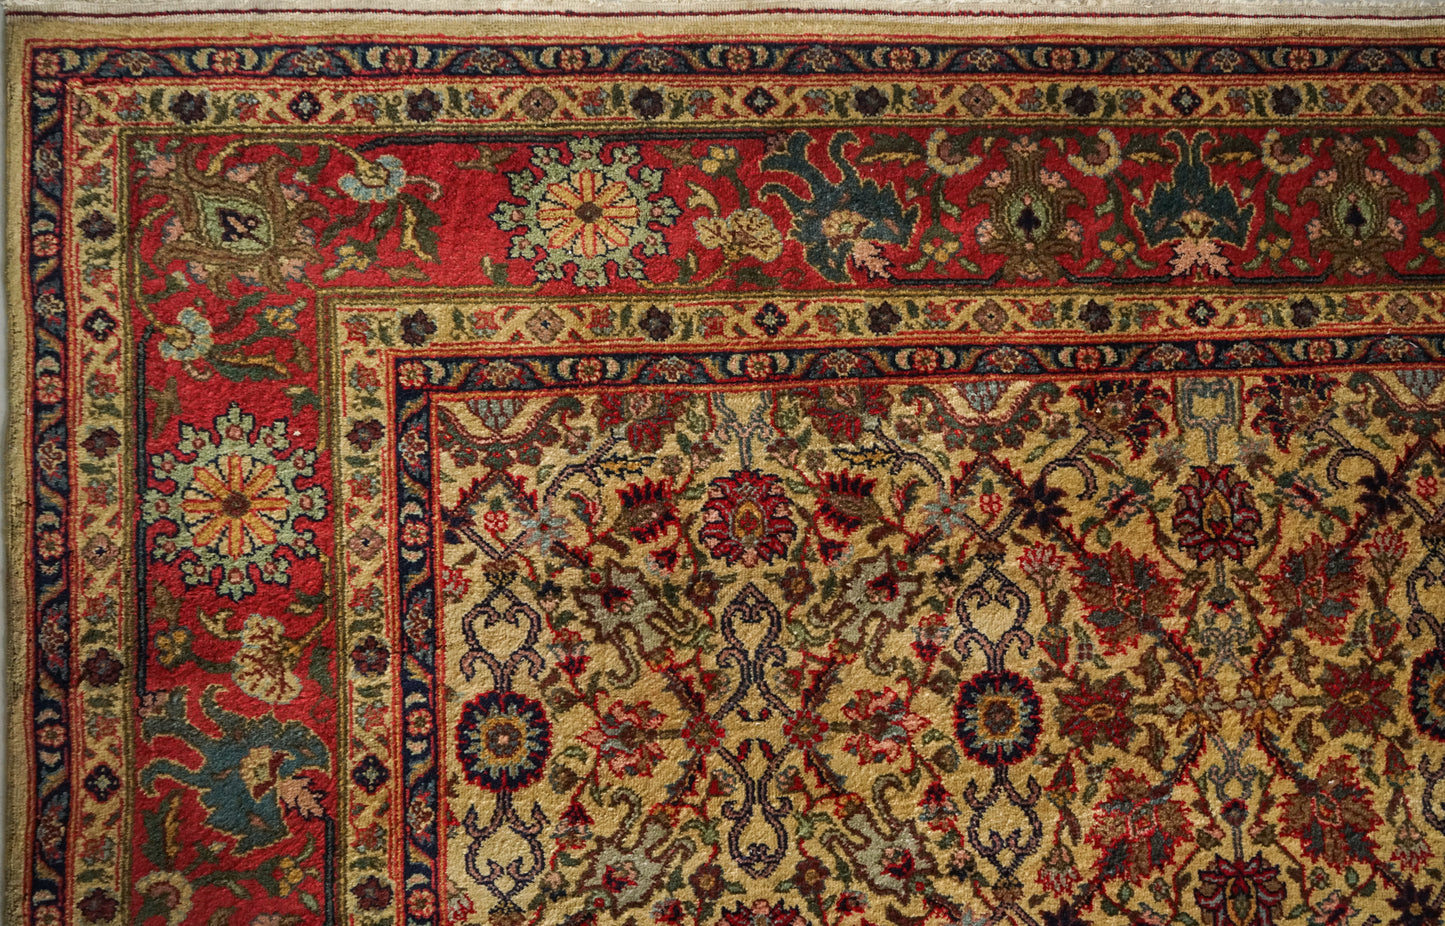 Large hand woven rug - Arts and crafts - liberty style influence